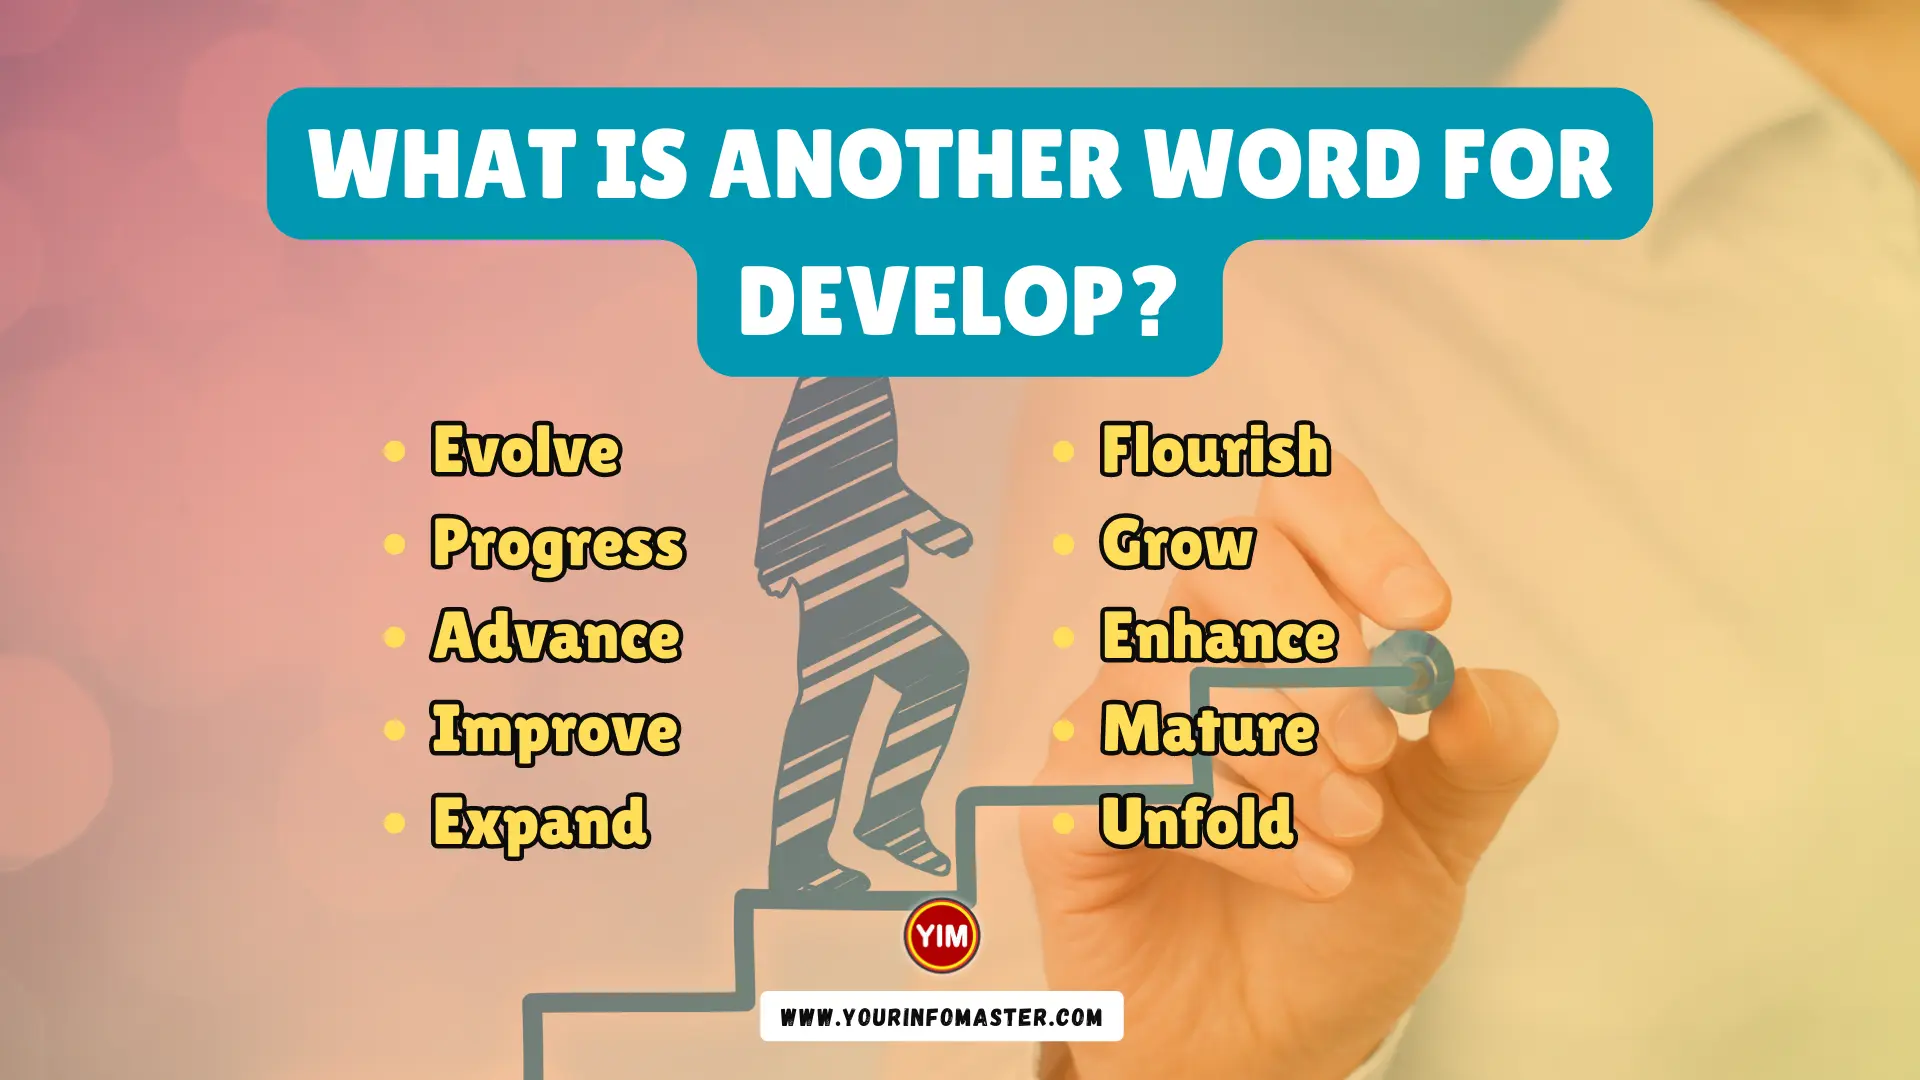 What is another word for Develop